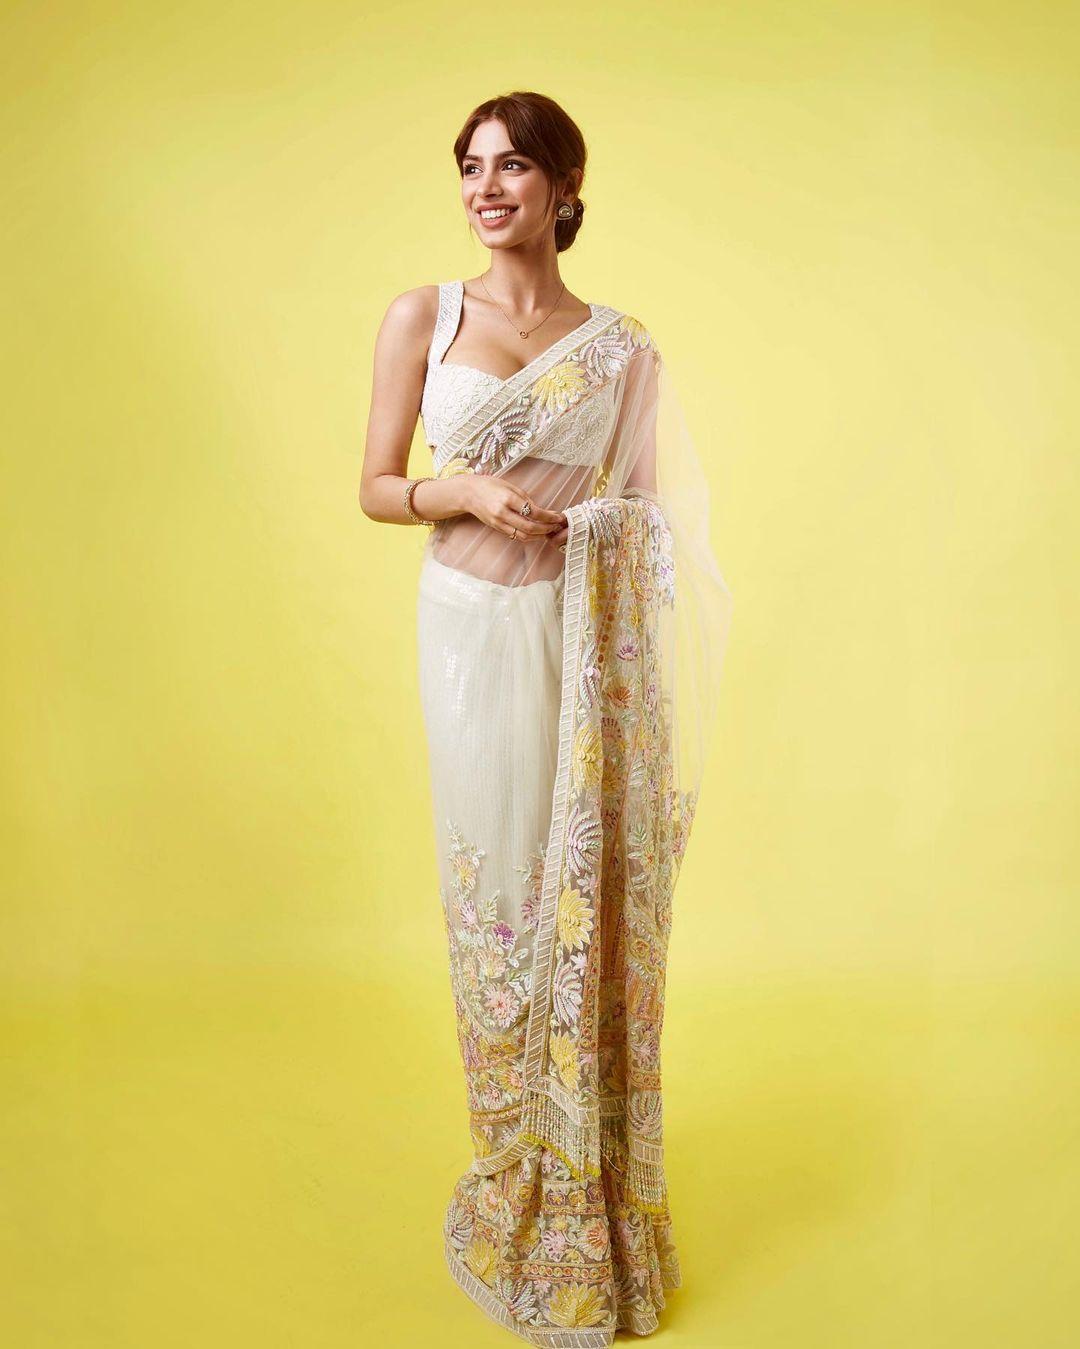 Khushi Kapoor has our hearts with her stunning saree featuring heavy borders, making it perfect to ace your ethnic look